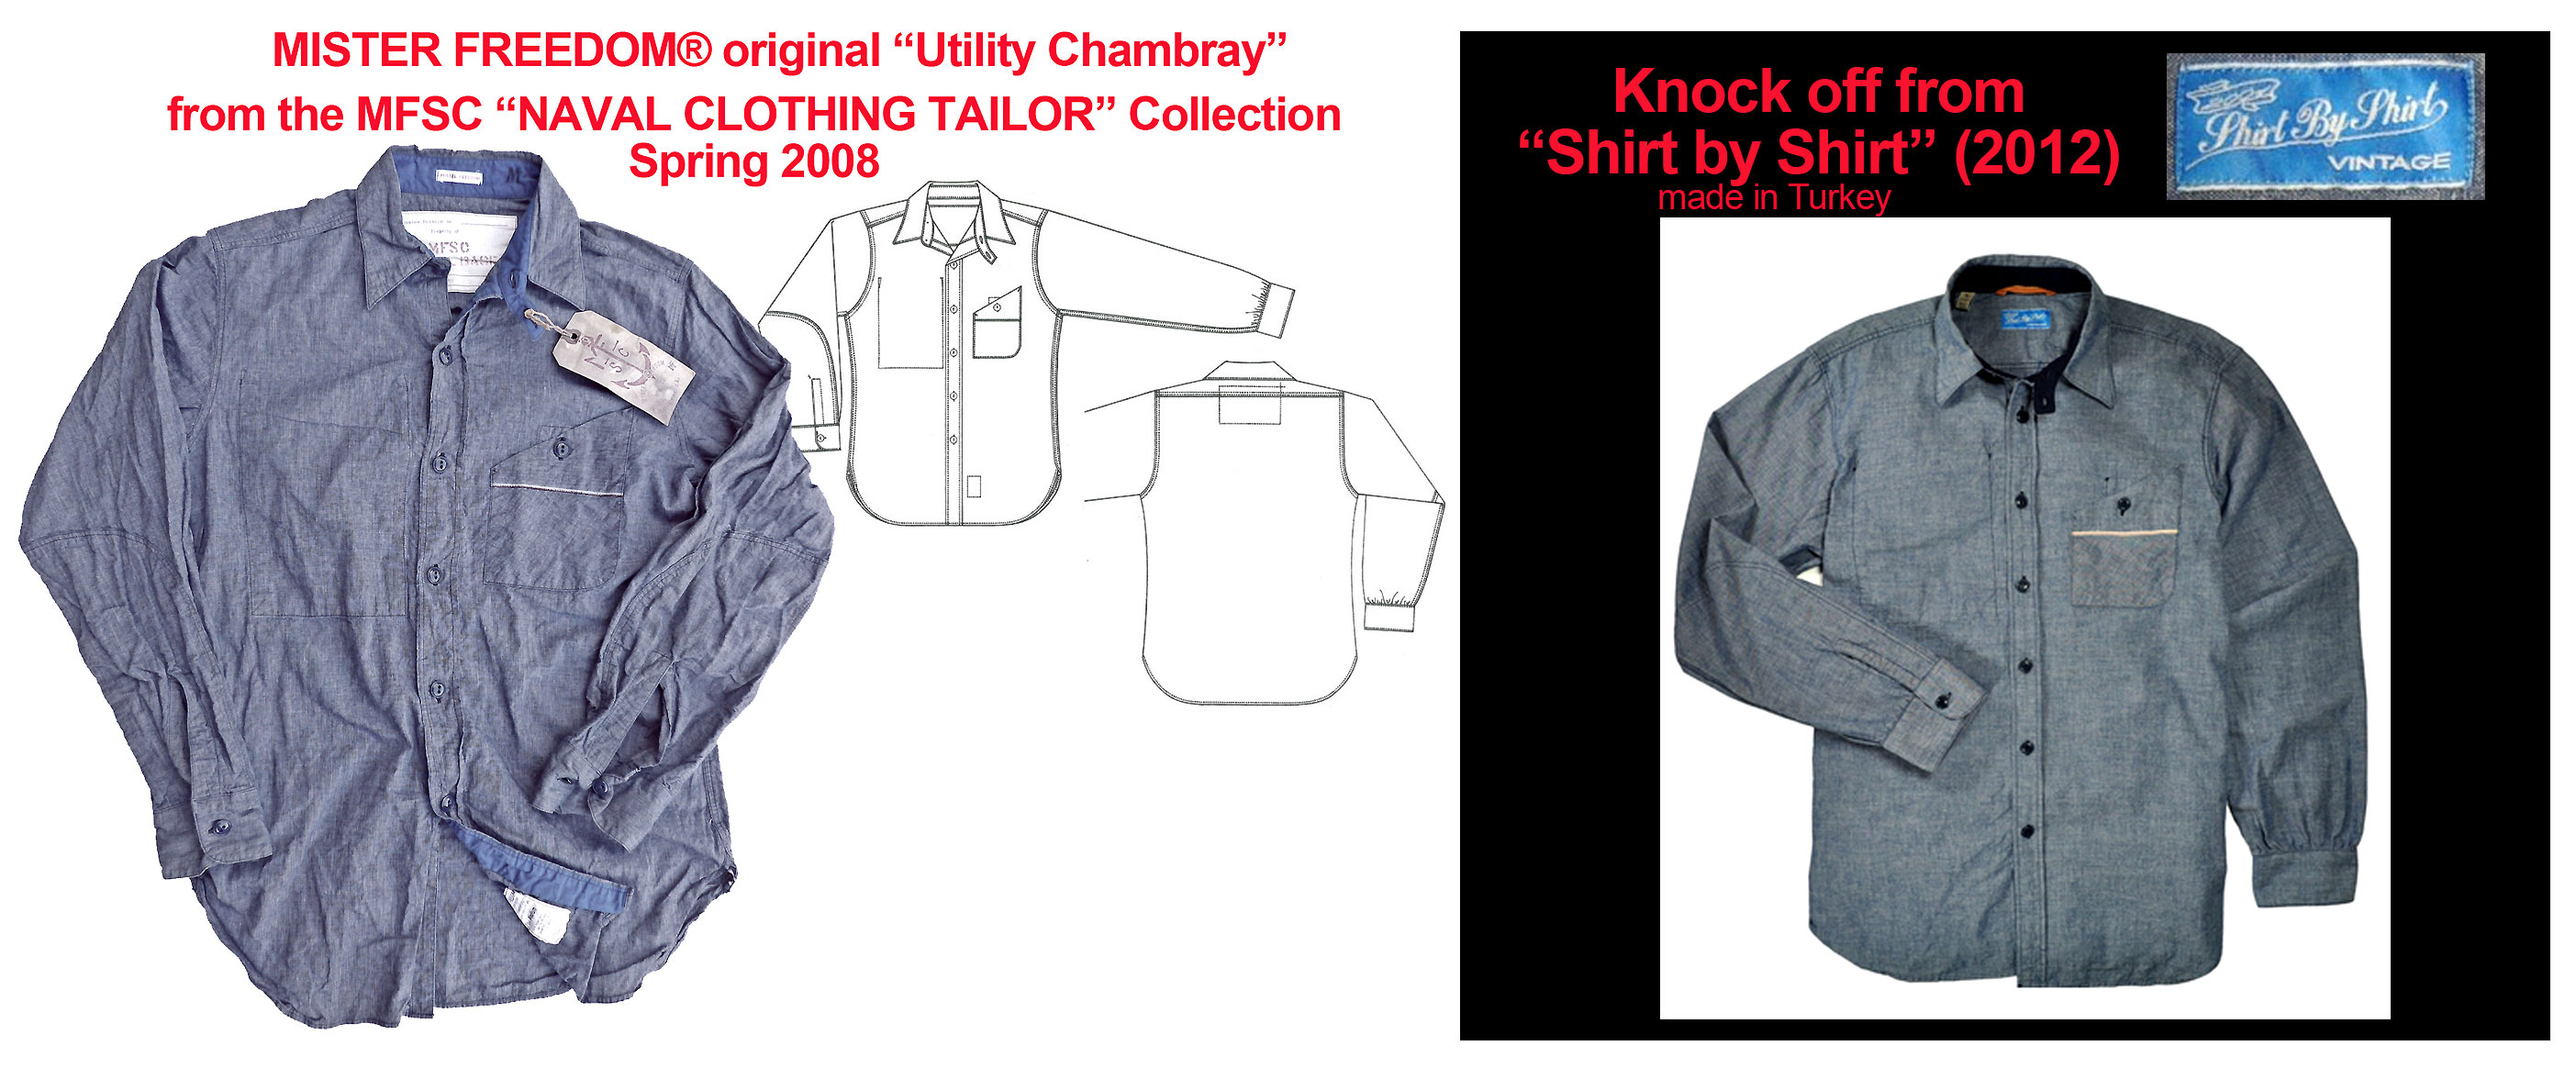 2012 "Shirt by Shirt" knock-off of MF® Utility Chambray ©2008